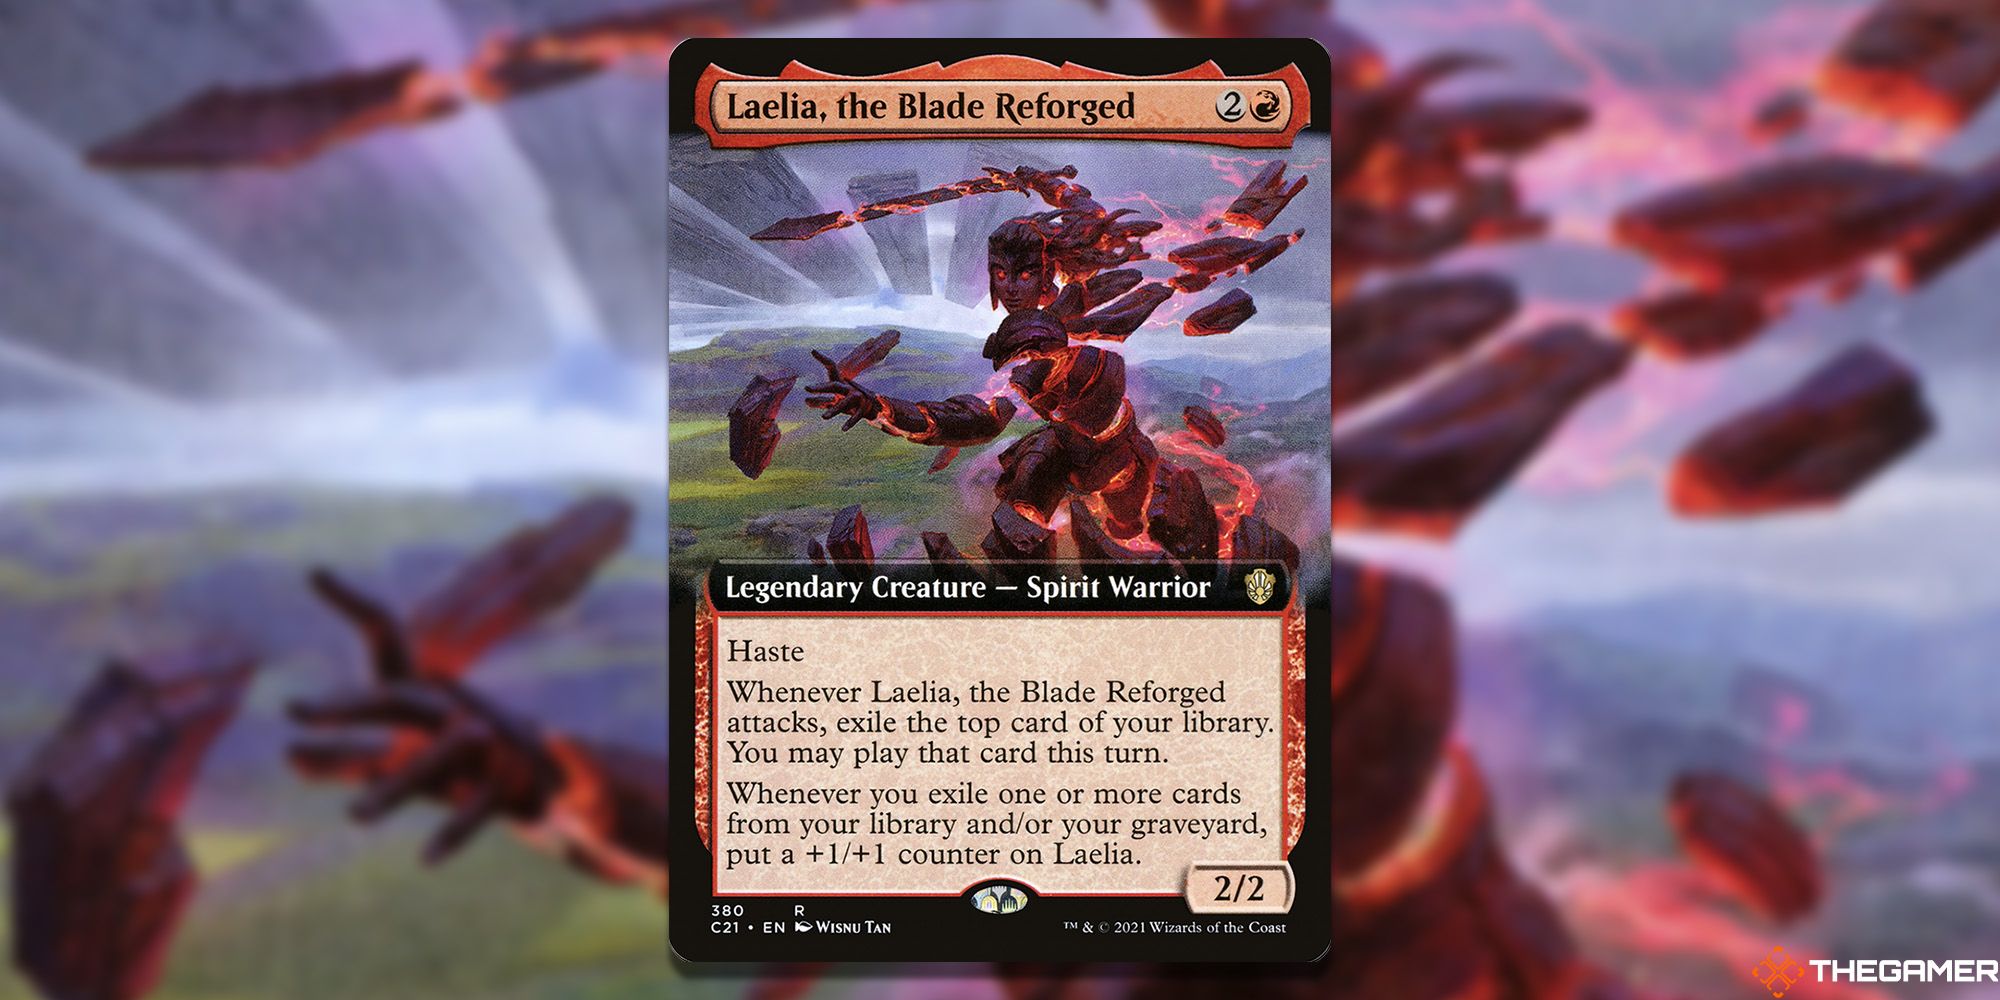 laelia, the Blade Reforged Magic: The Gathering card overlaid over artwork.